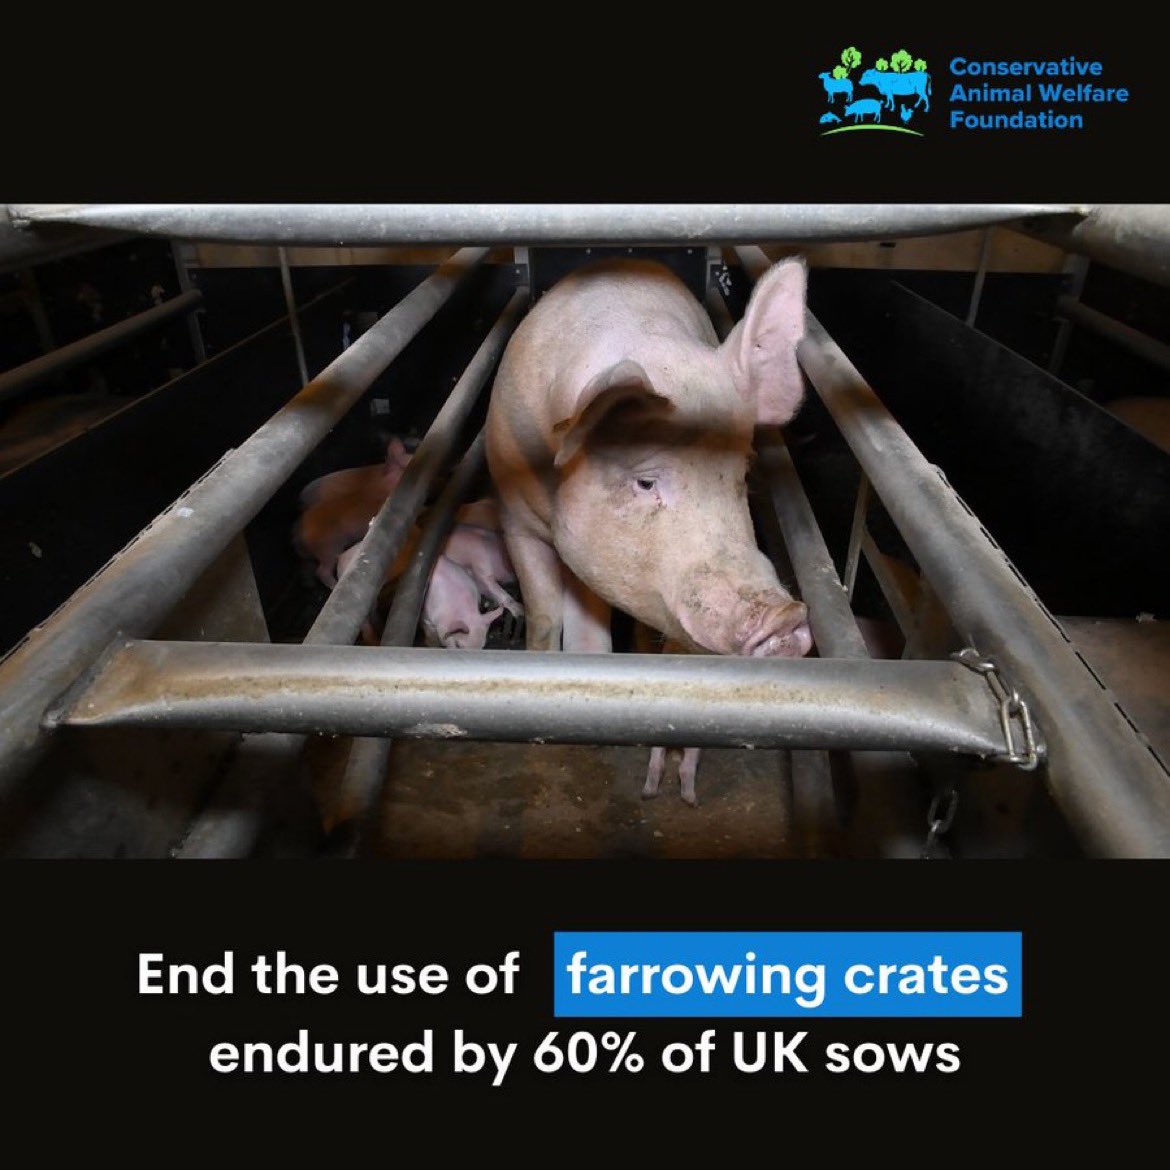 A typical sow spends almost a quarter of her breeding life in a tiny crate - so small she cannot even turn around or interact with her piglets. These are used for 60% of UK herds (around 200,000 sows). We call for an end to pig farrowing crates #CrateEscape…